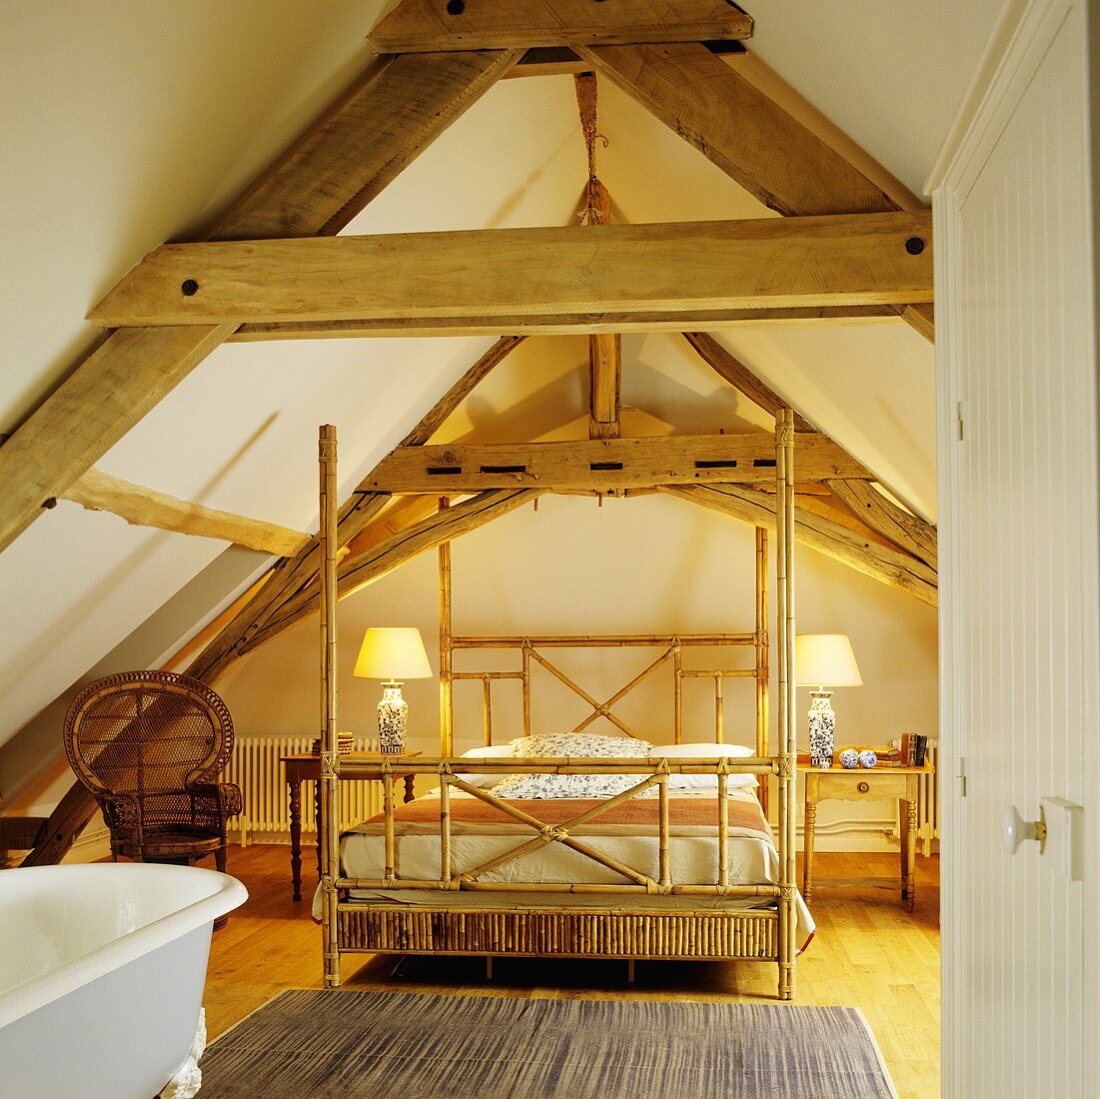 An attic room with a rustic wood beam ceiling and a four poster bed made of bamboo wood